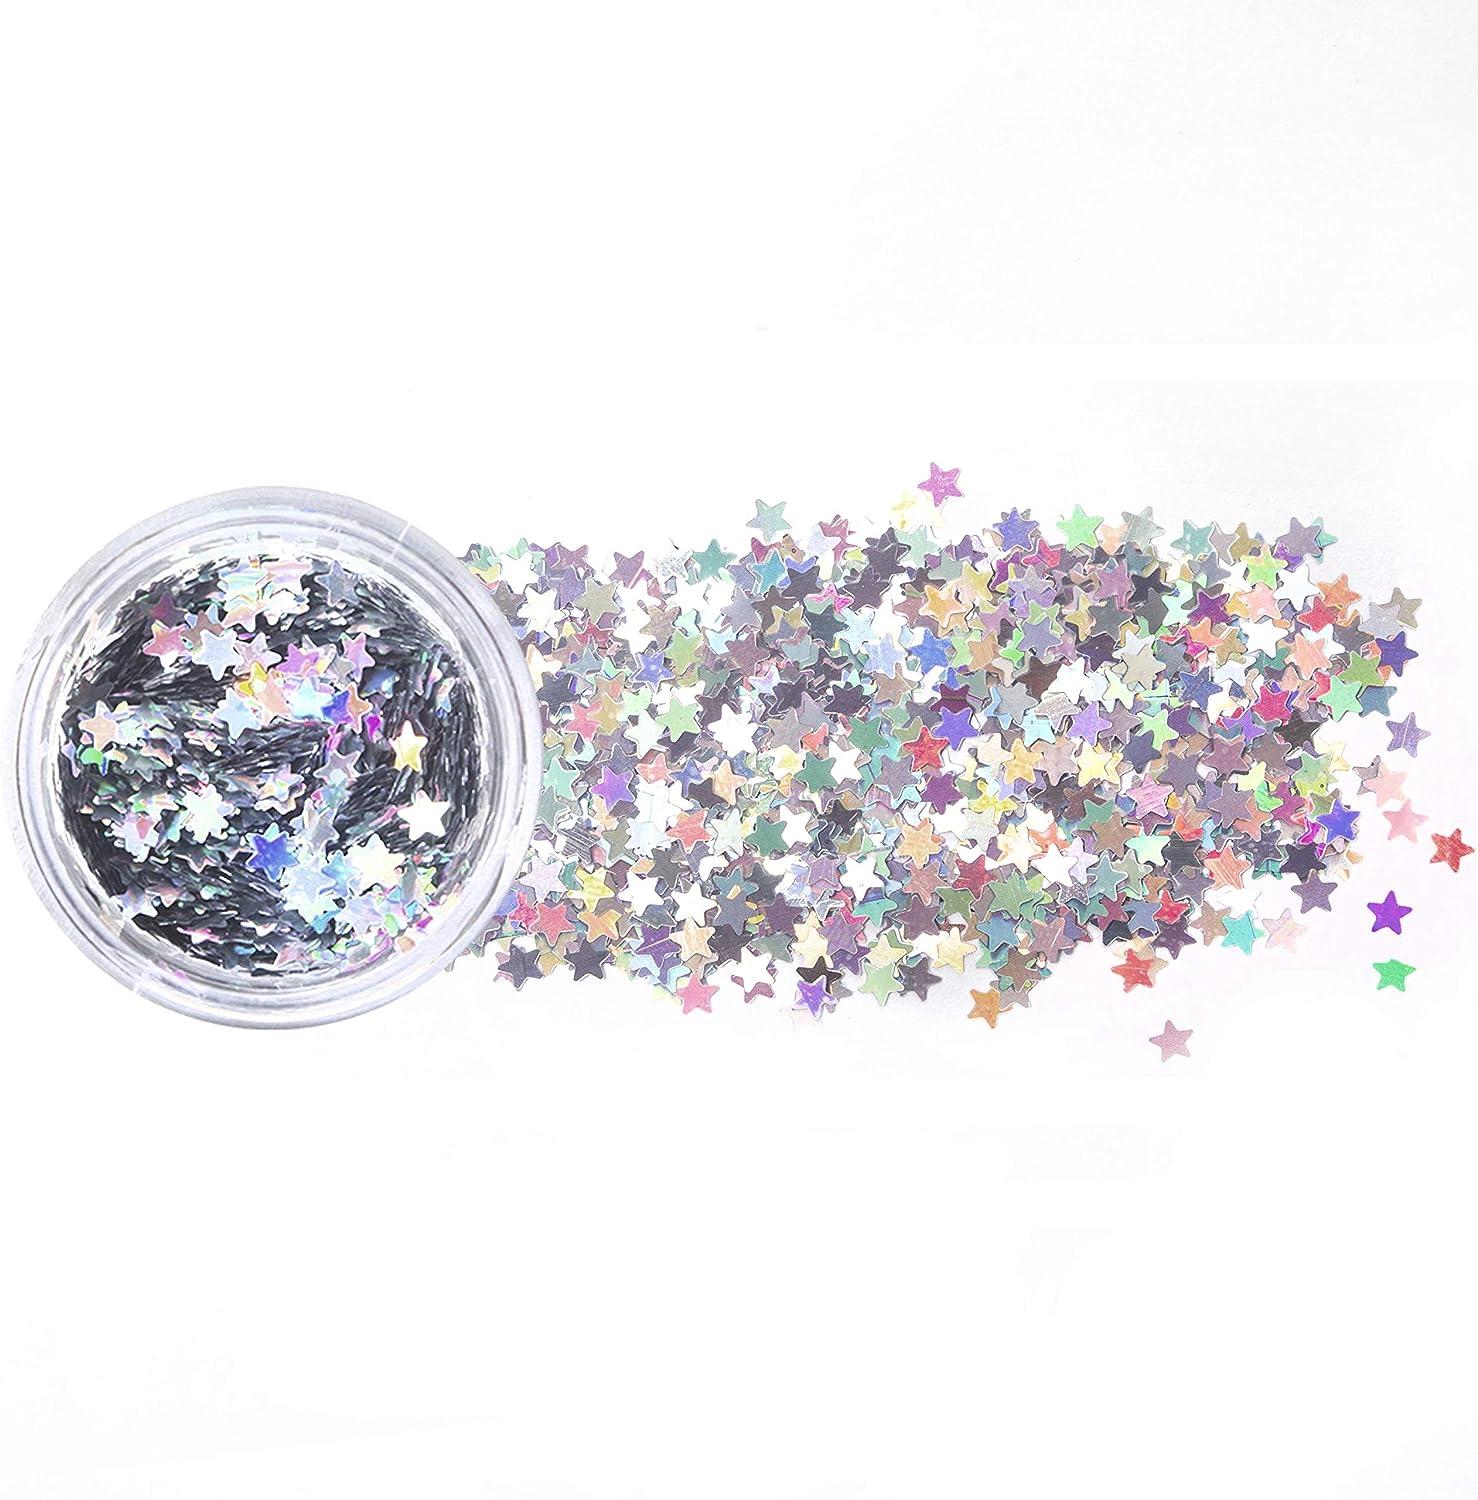 Laza Laser Tiny Star Glitter Sparkle Shiny False Nail Sequins Acrylic  Paillettes Redial Nails Party Decoration DIY Crafts Premium Nail Art Body  Eye Bling 10g Jars- Holographic Star